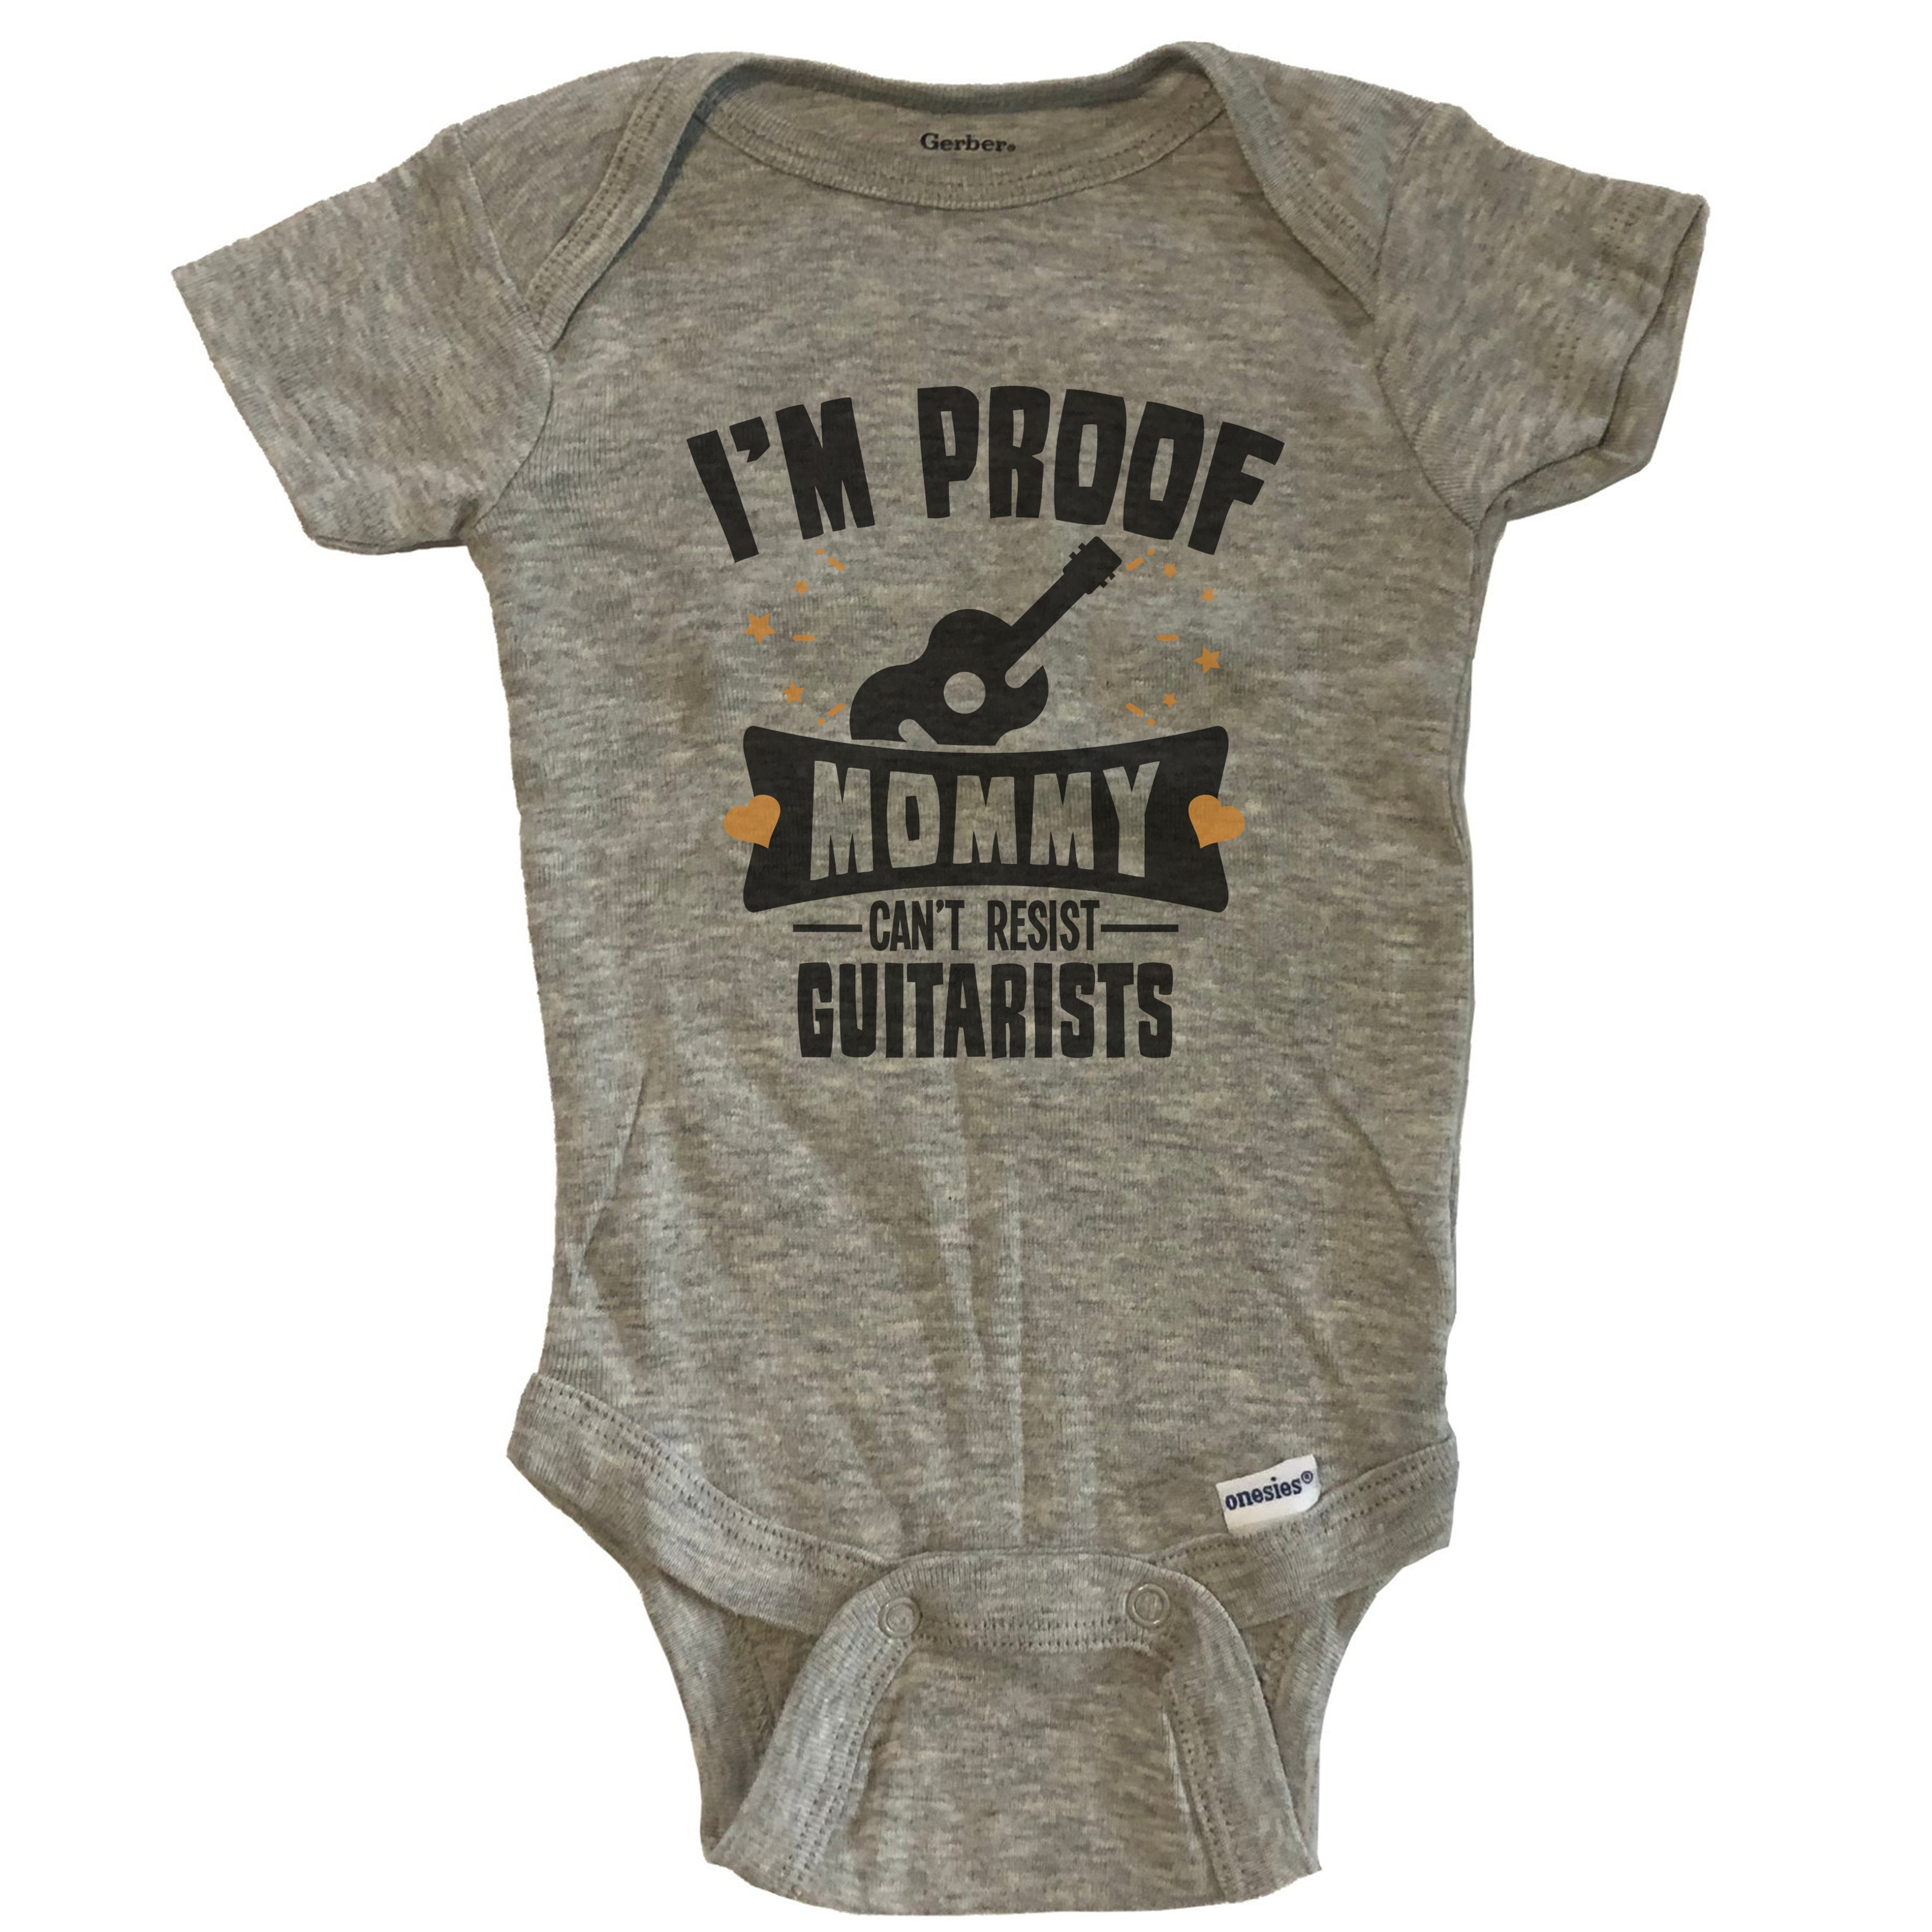 I'm Proof Mommy Can't Resist Guitarists Baby Bodysuit Details about   Funny Guitar Onesie 